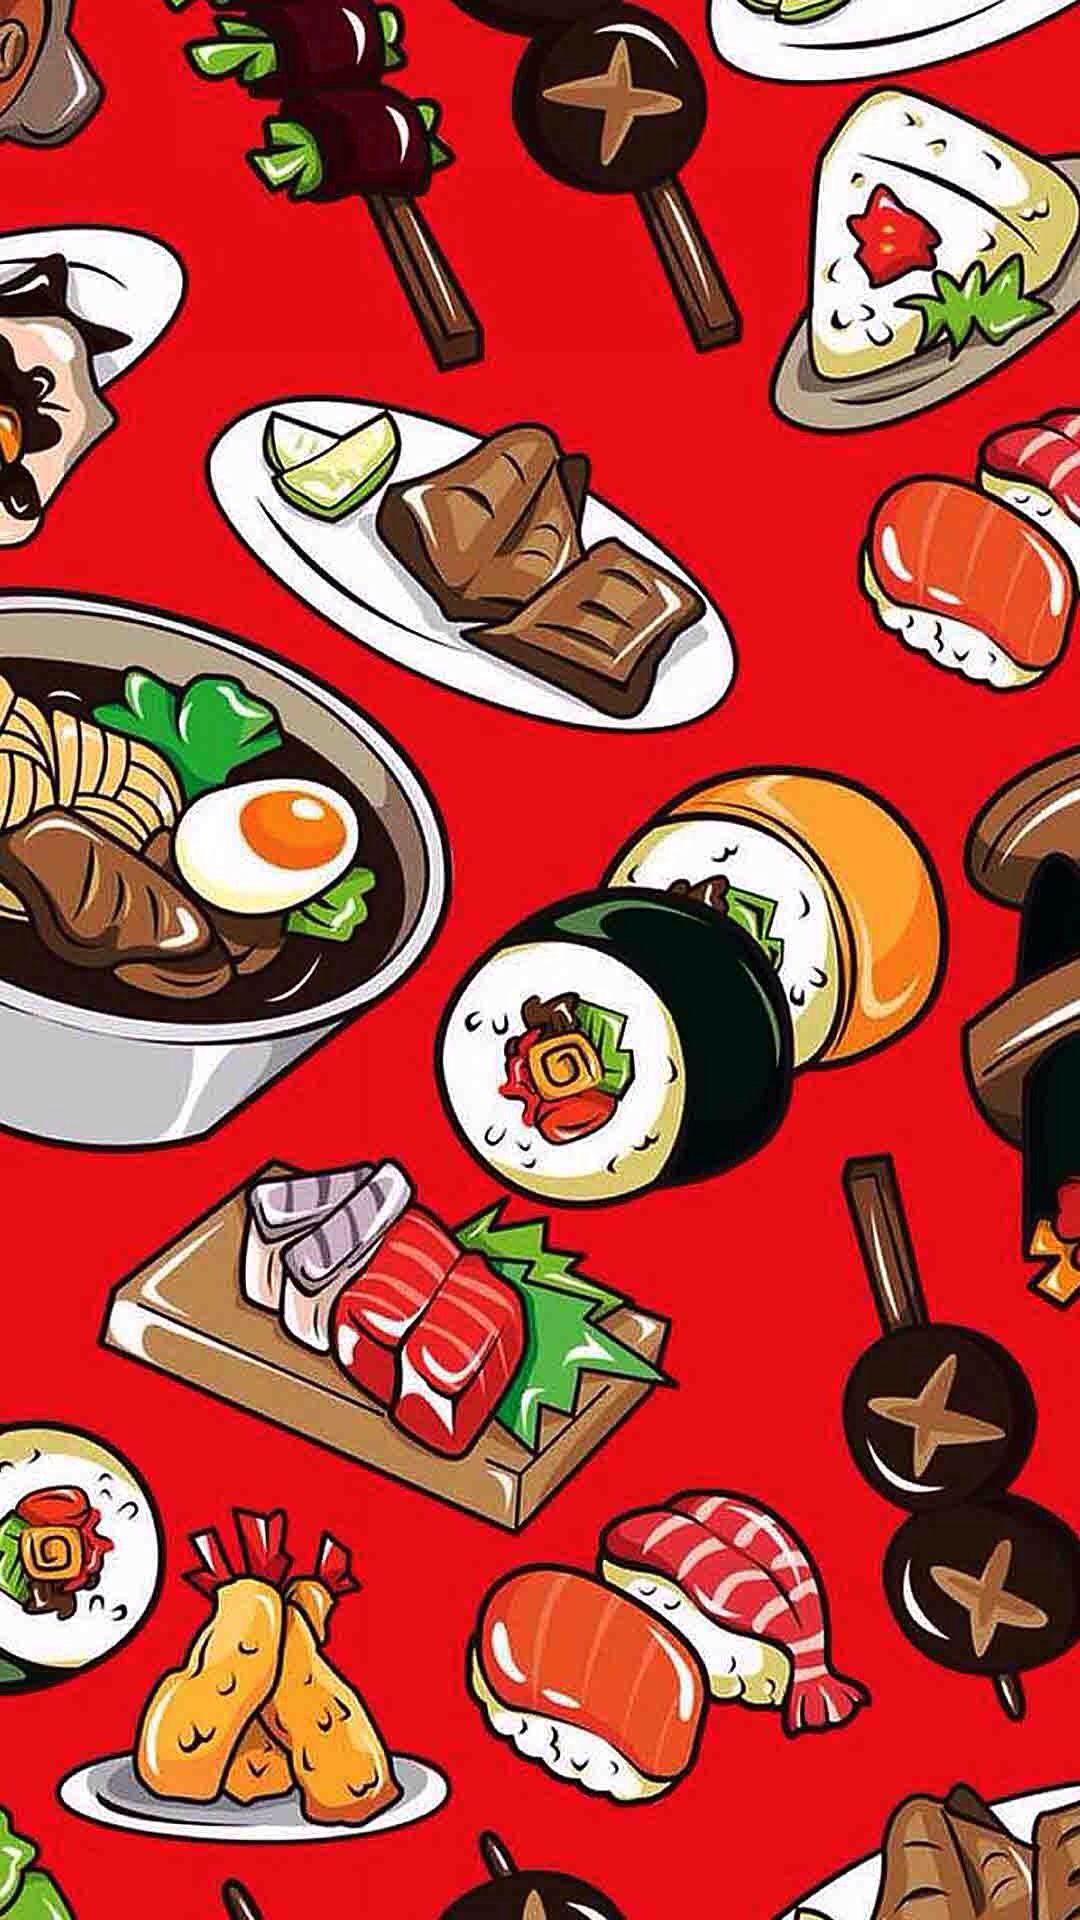 Anime background wallpaper image by Cáo Mặc Áo on FOOD. Sushi